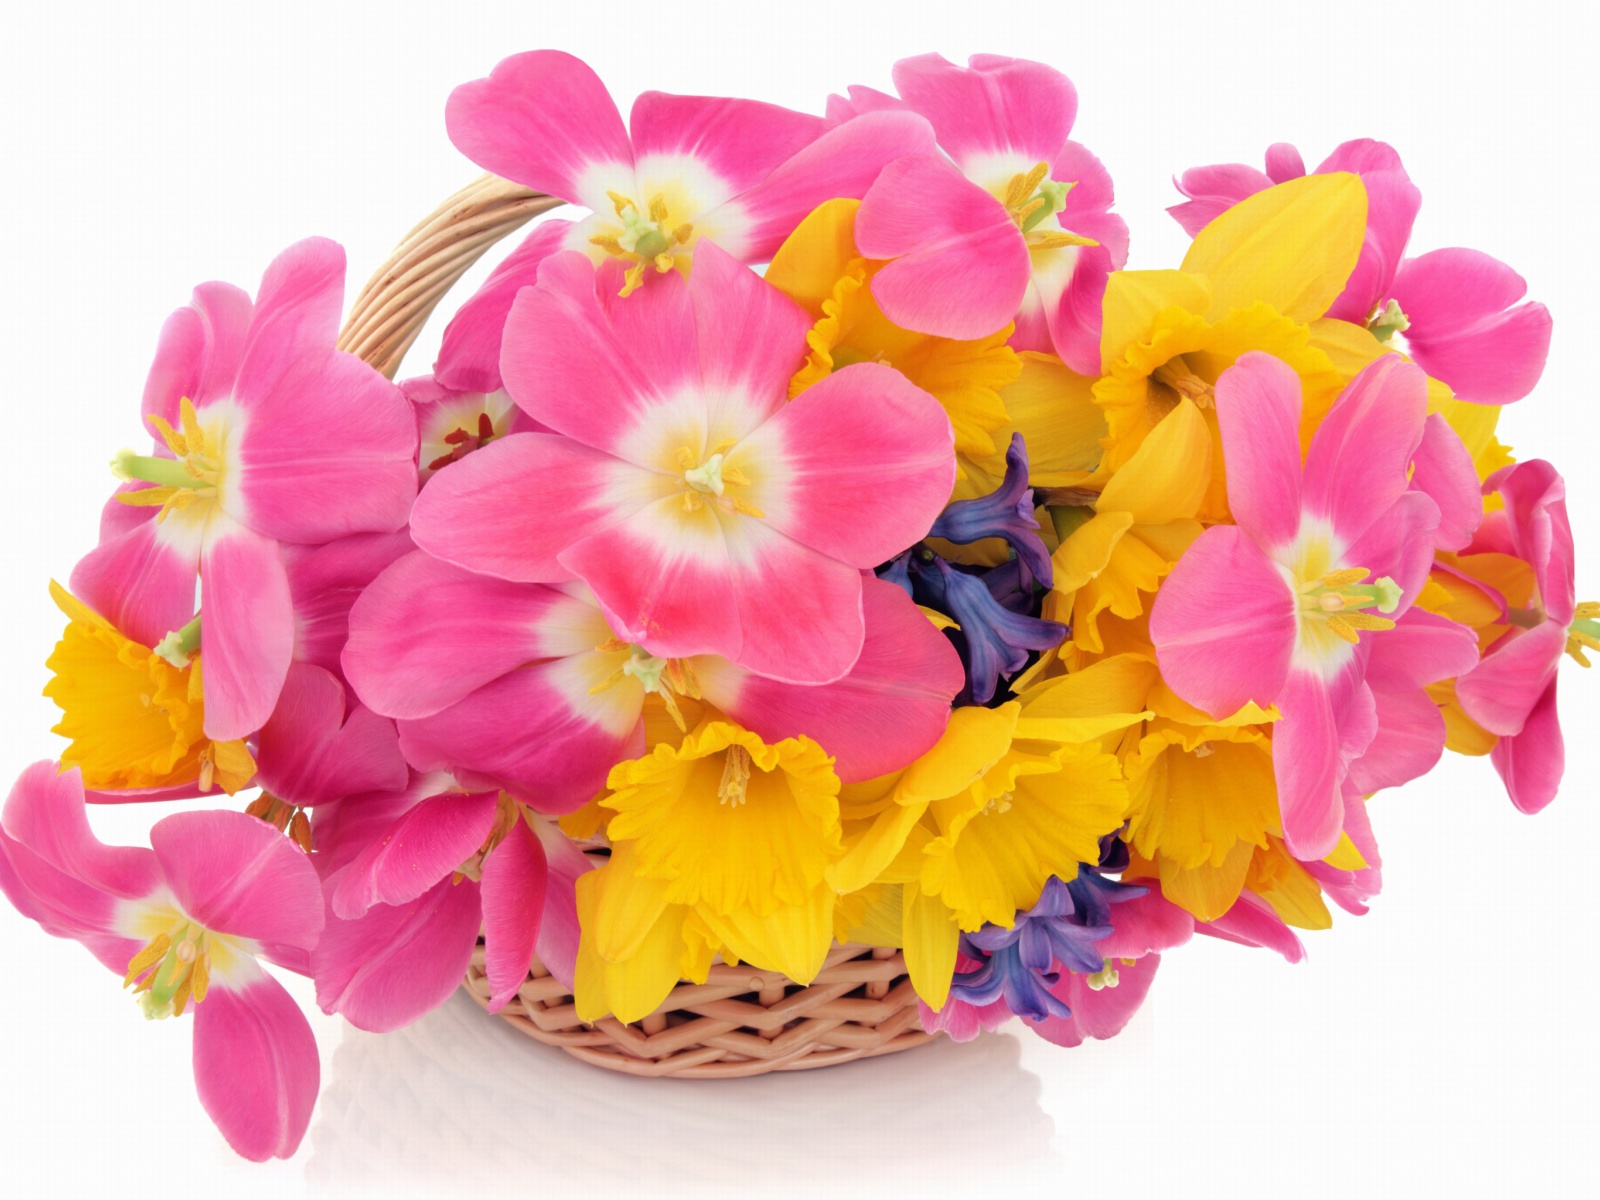 Indoor Basket of Tulips and Daffodils wallpaper 1600x1200